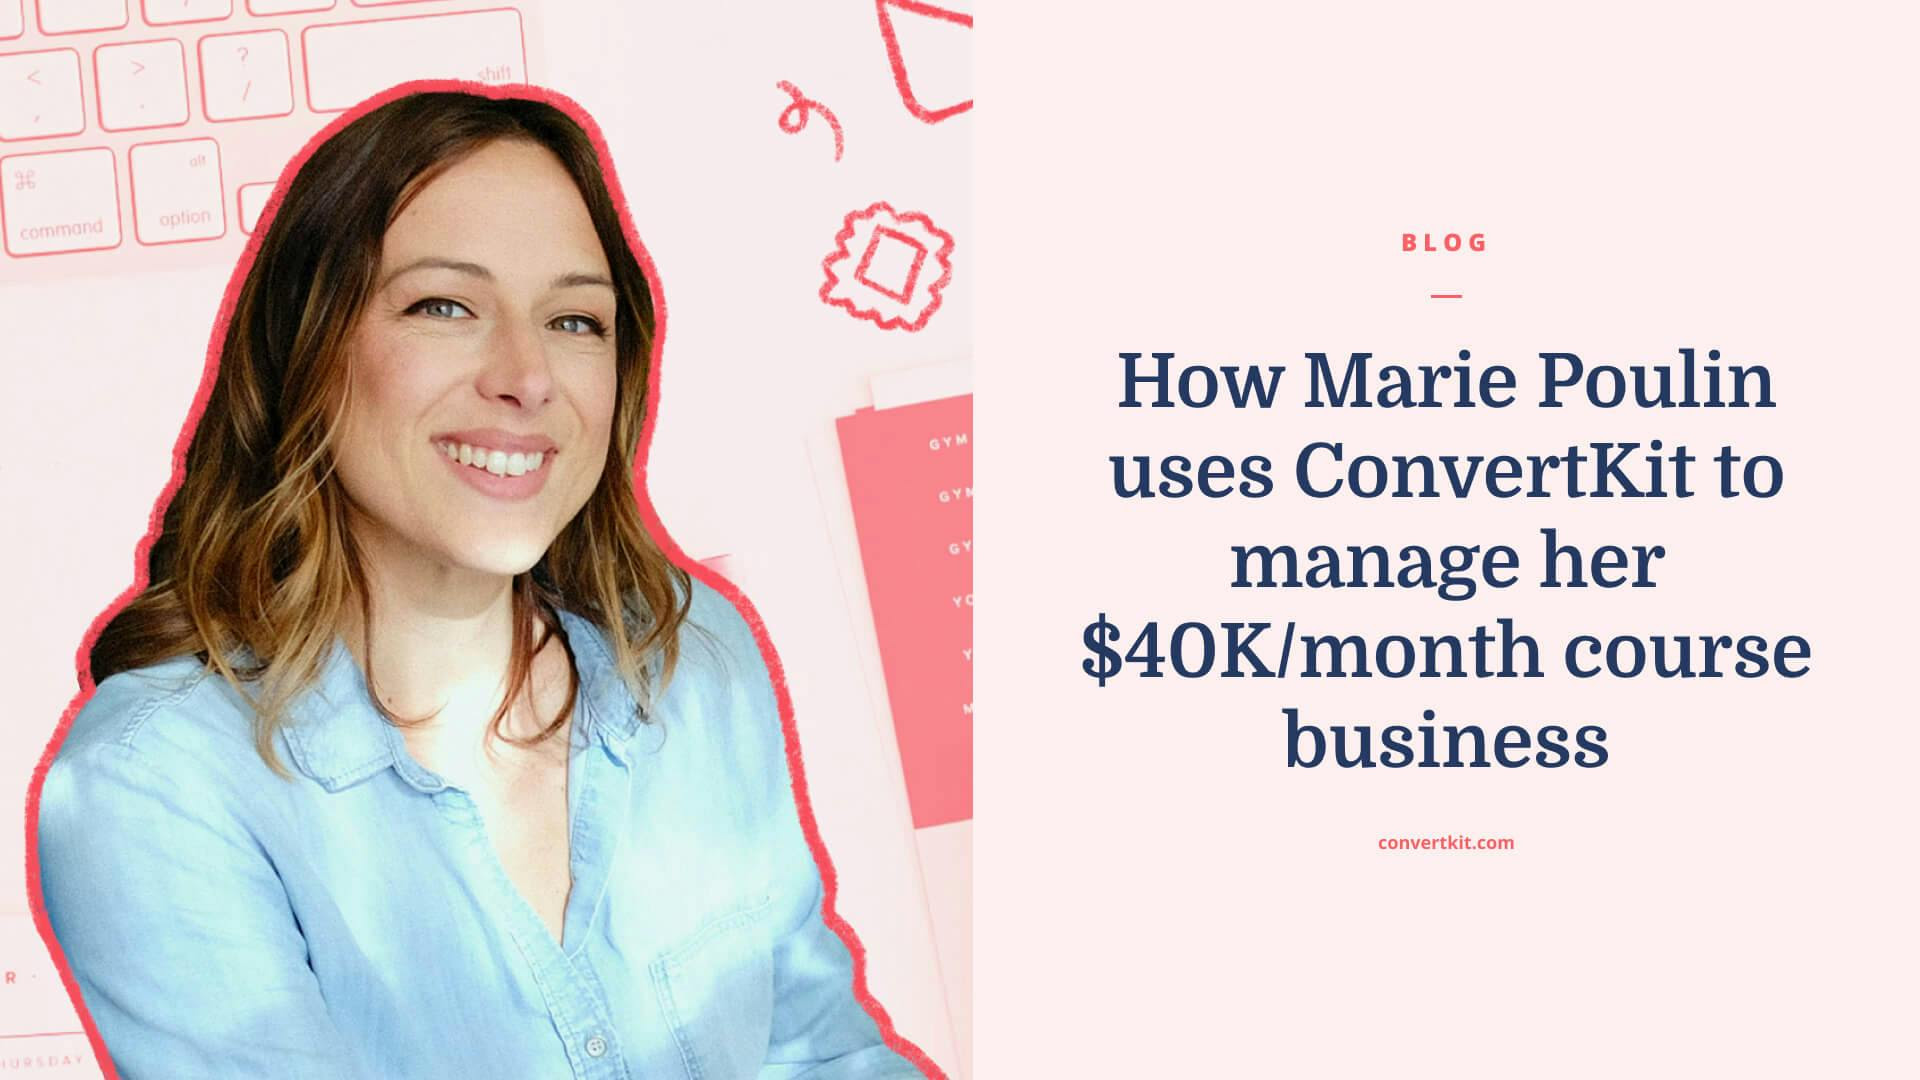 Marie teaches business owners to design their life and business systems to match their unique lifestyles.